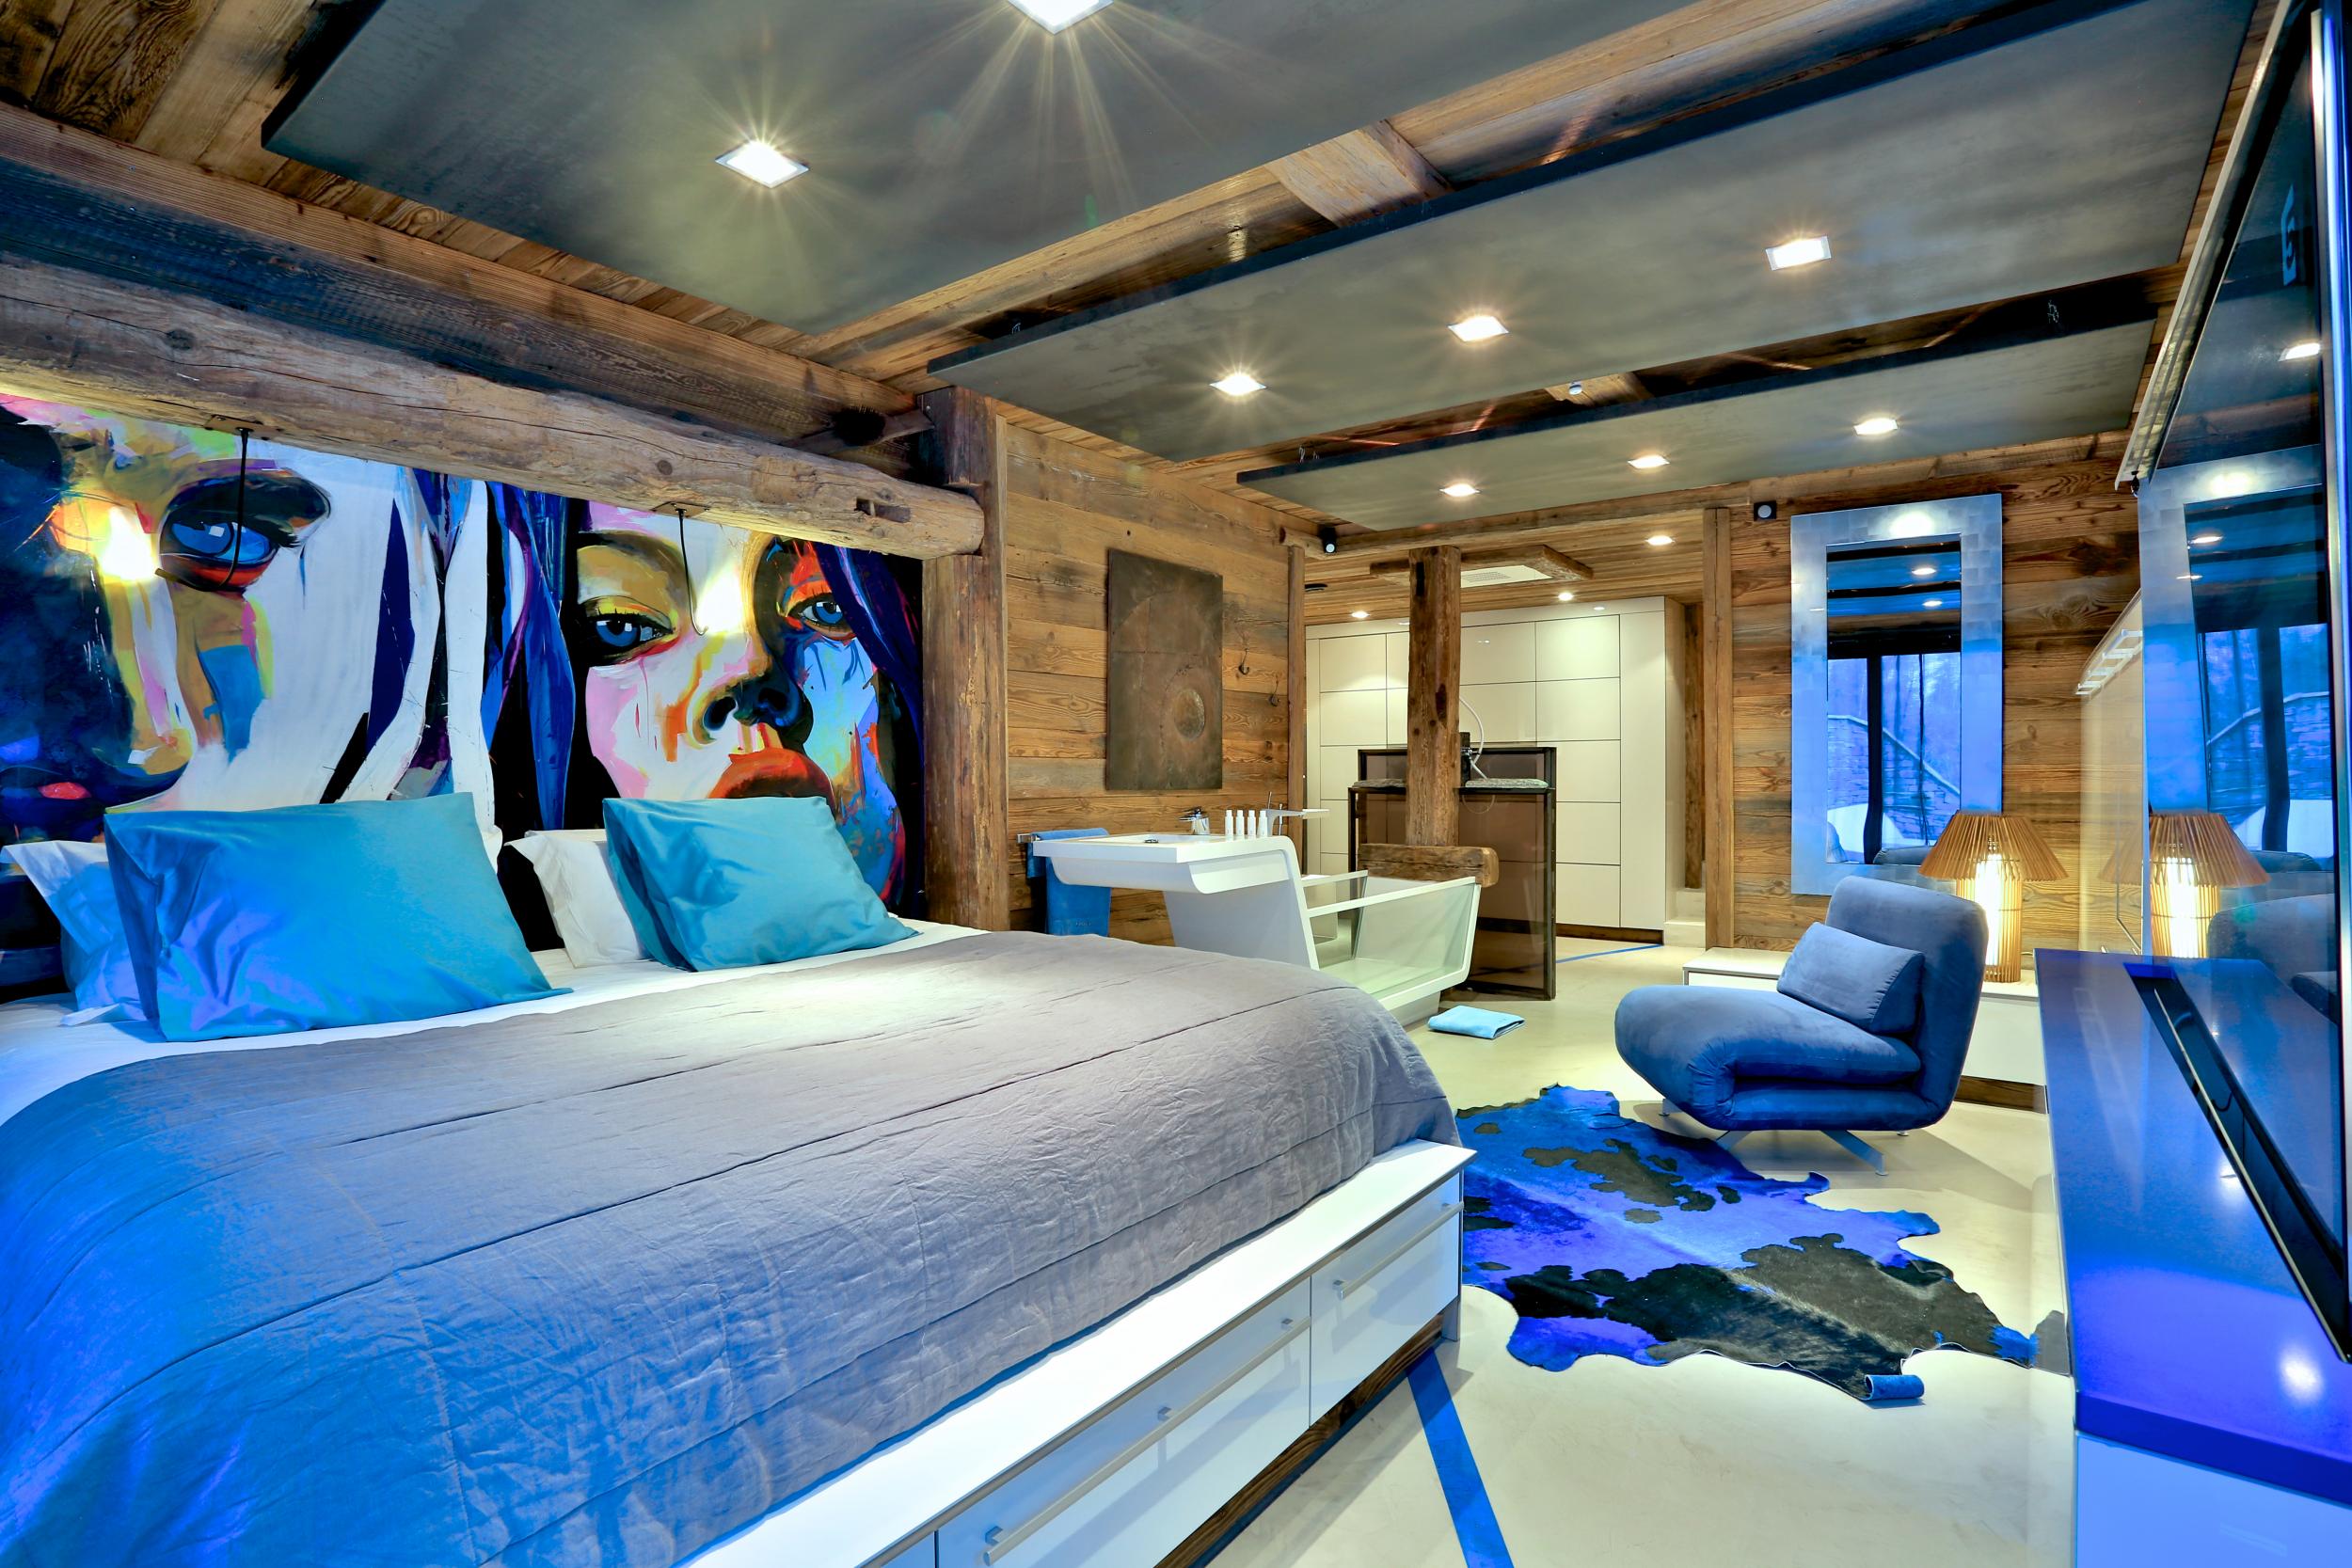 One of the bedrooms at Chalet Quezac